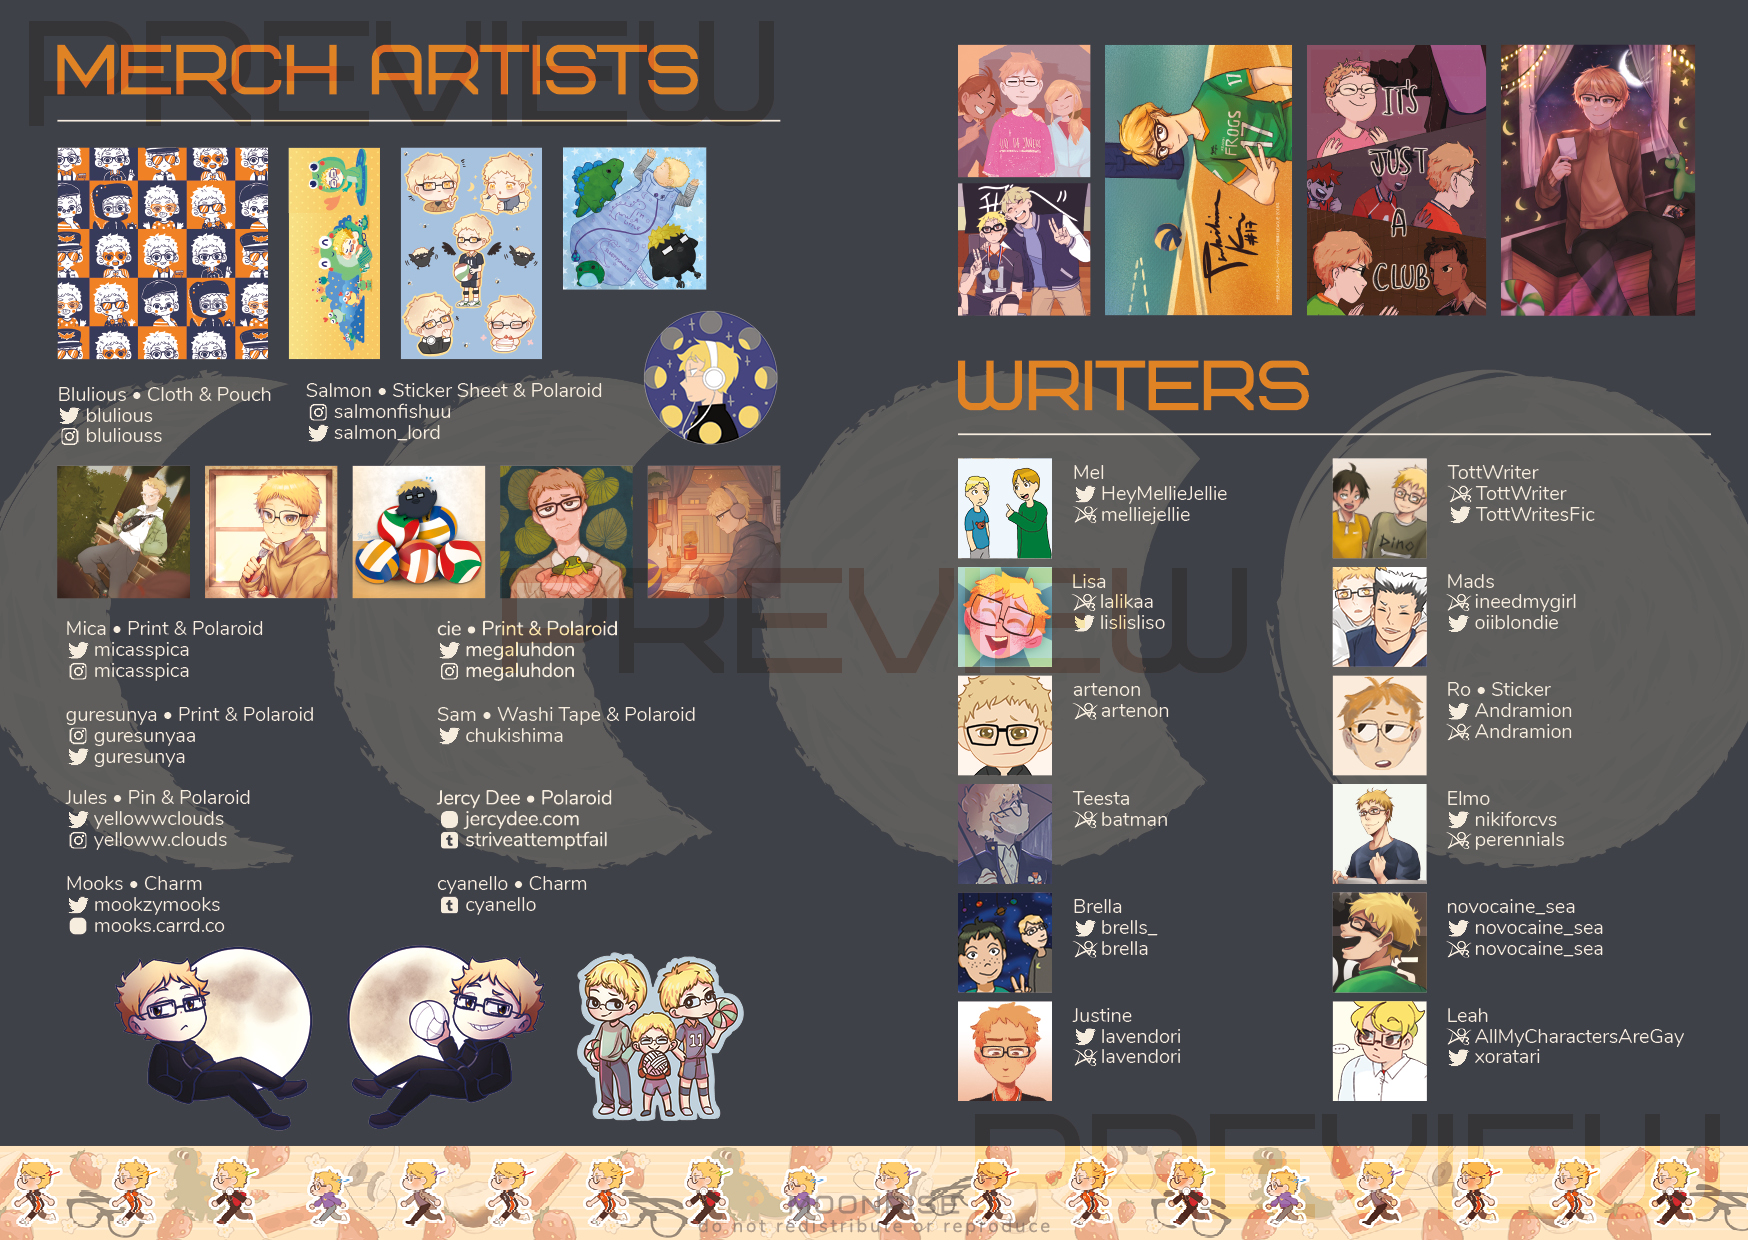 A screenshot of one of the digital zine's contributor spreads--both pages list all the merch artists and writers.